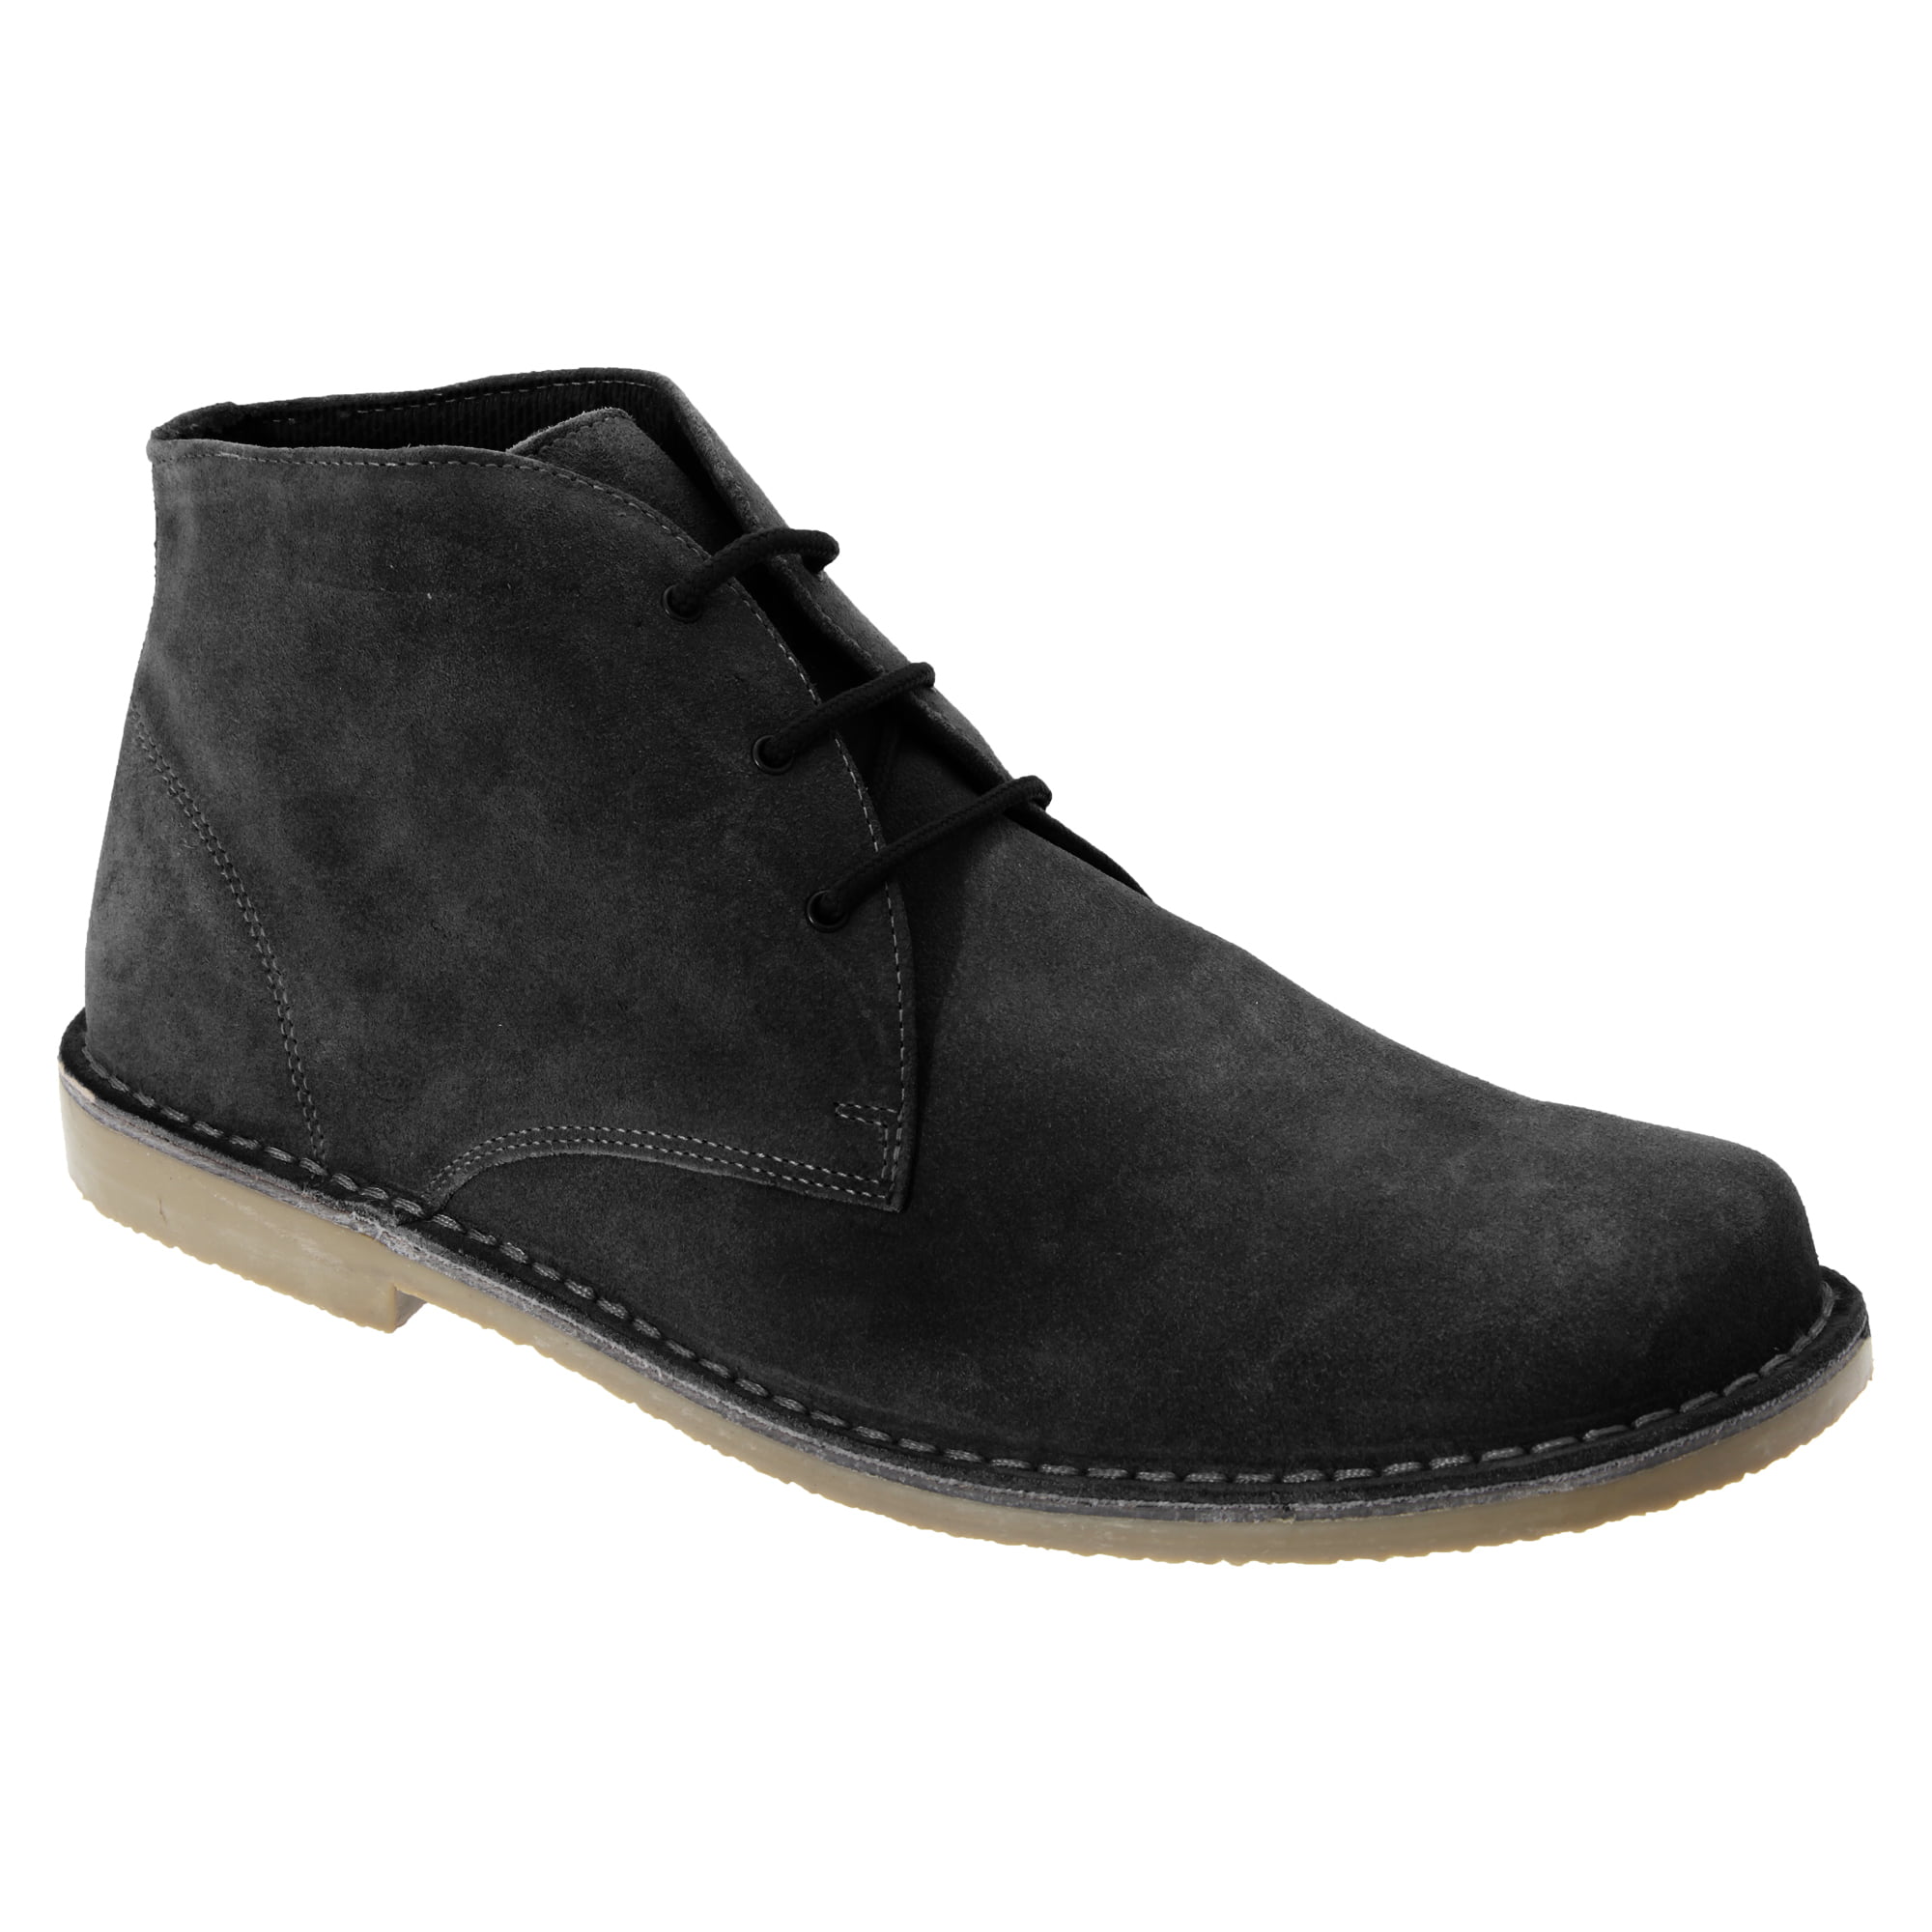 Mens Black Suede 3 Eyelet Desert Boots By Roamers Newest and best here ...